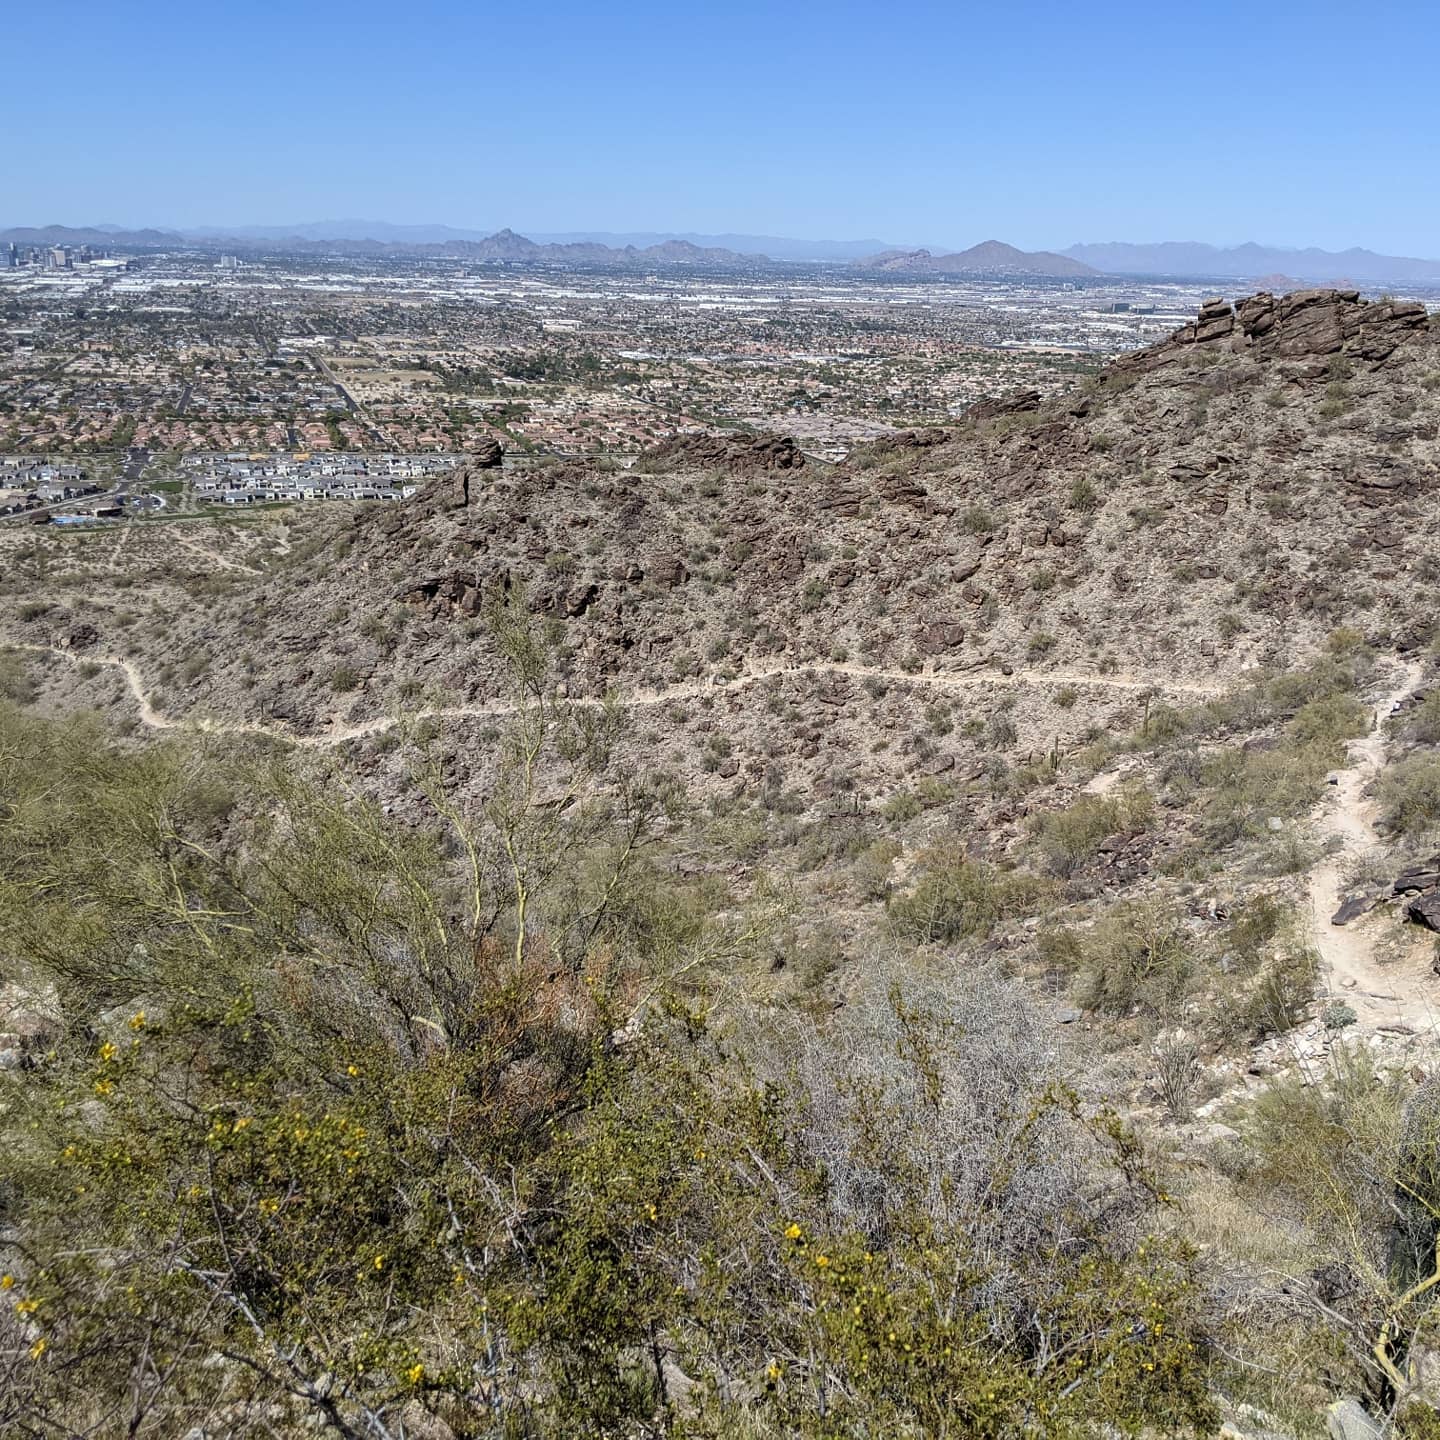 A few random shots from my hike yesterday that I thought people might appreciate. #phoenix